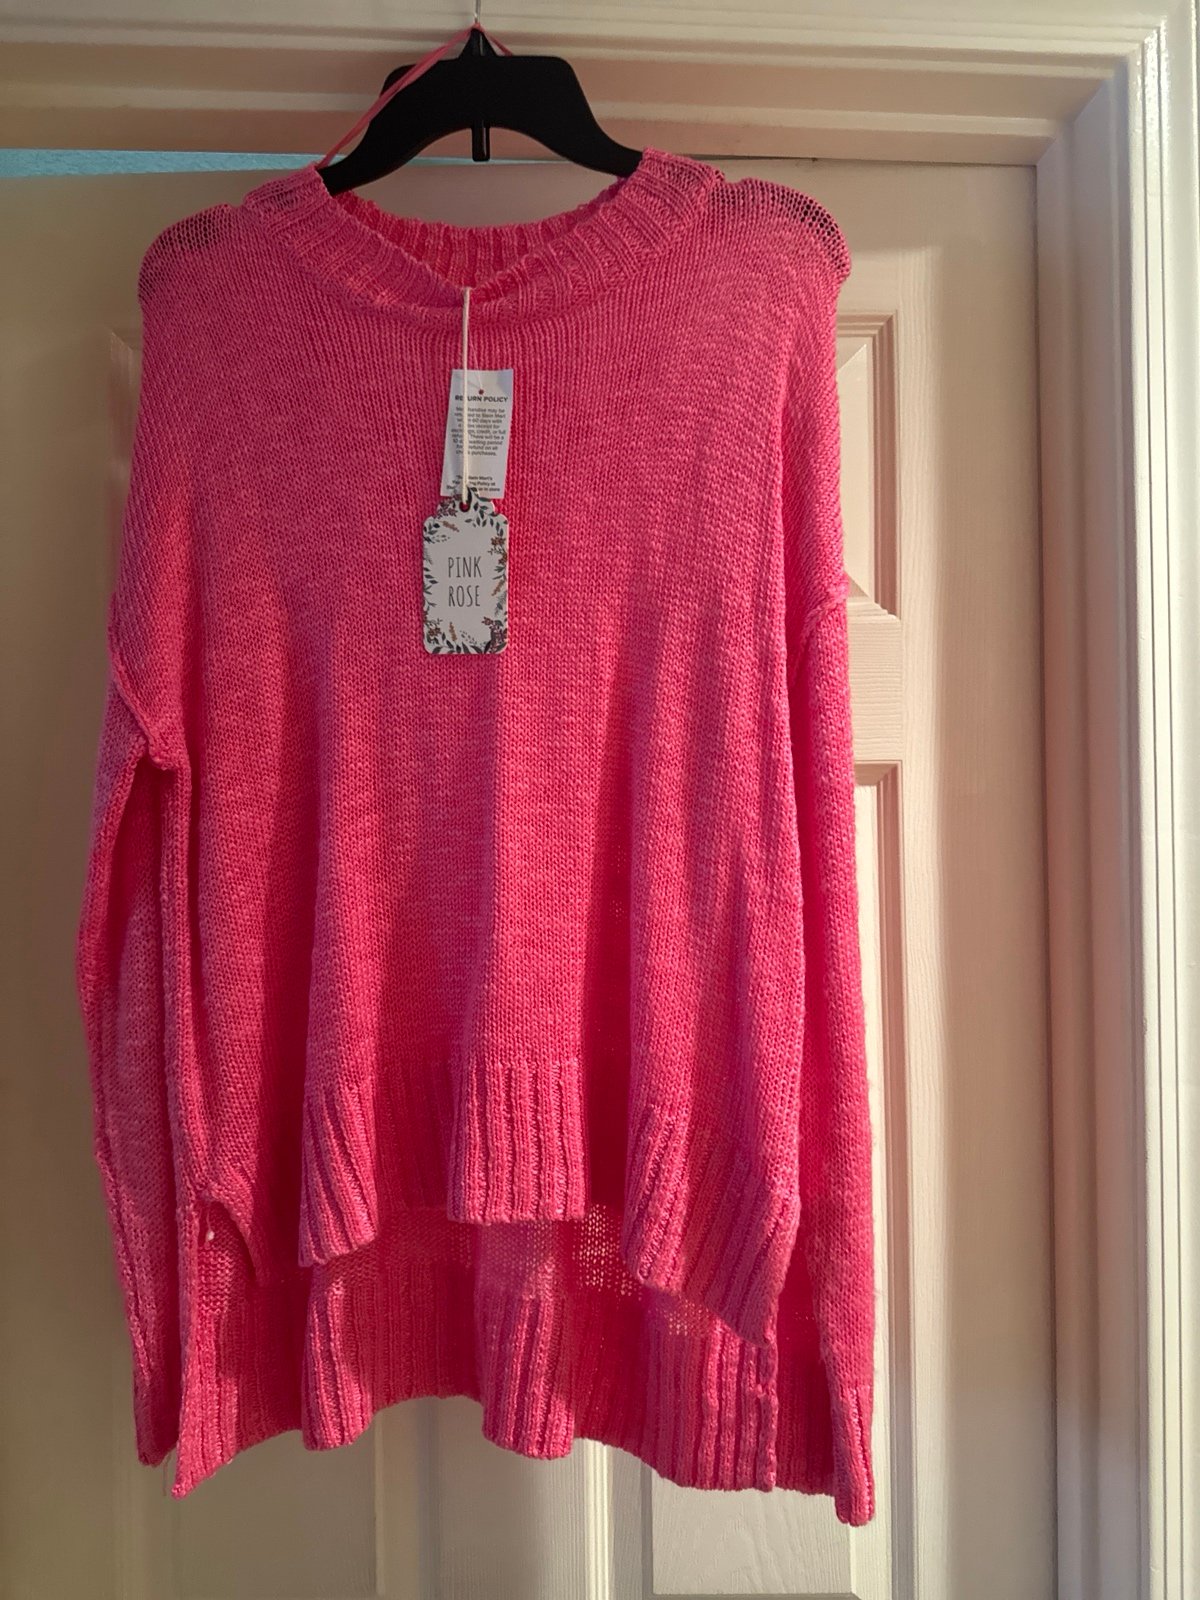 Nice Sweater pink nwt P9YLe97nO Store Online